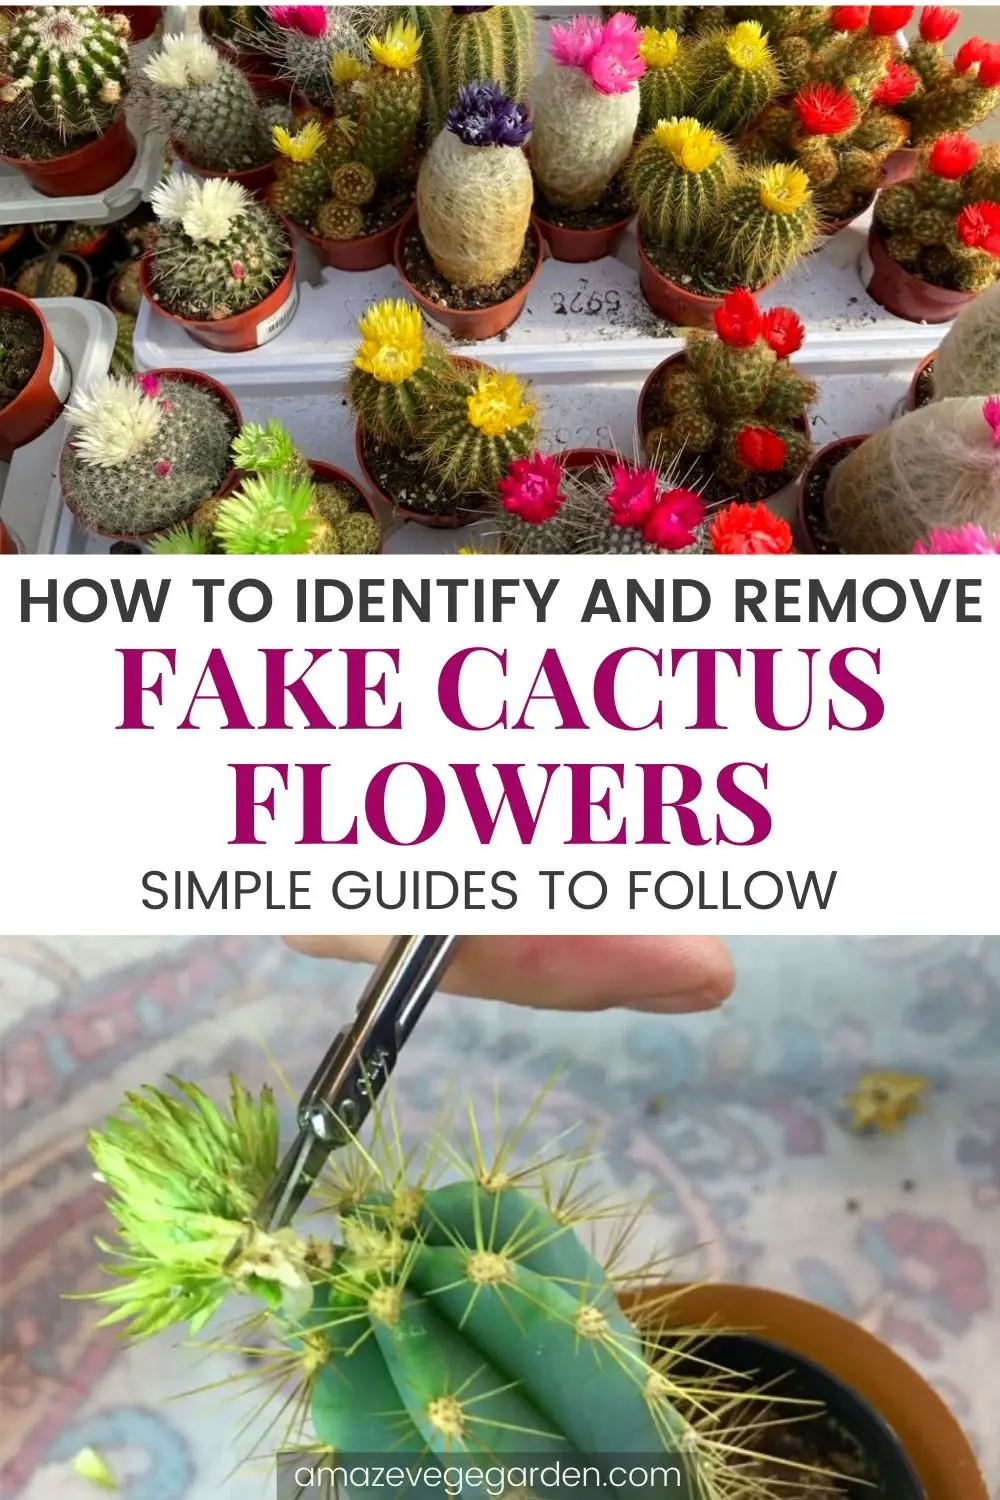 How To Identify and Remove Fake Cactus Flowers